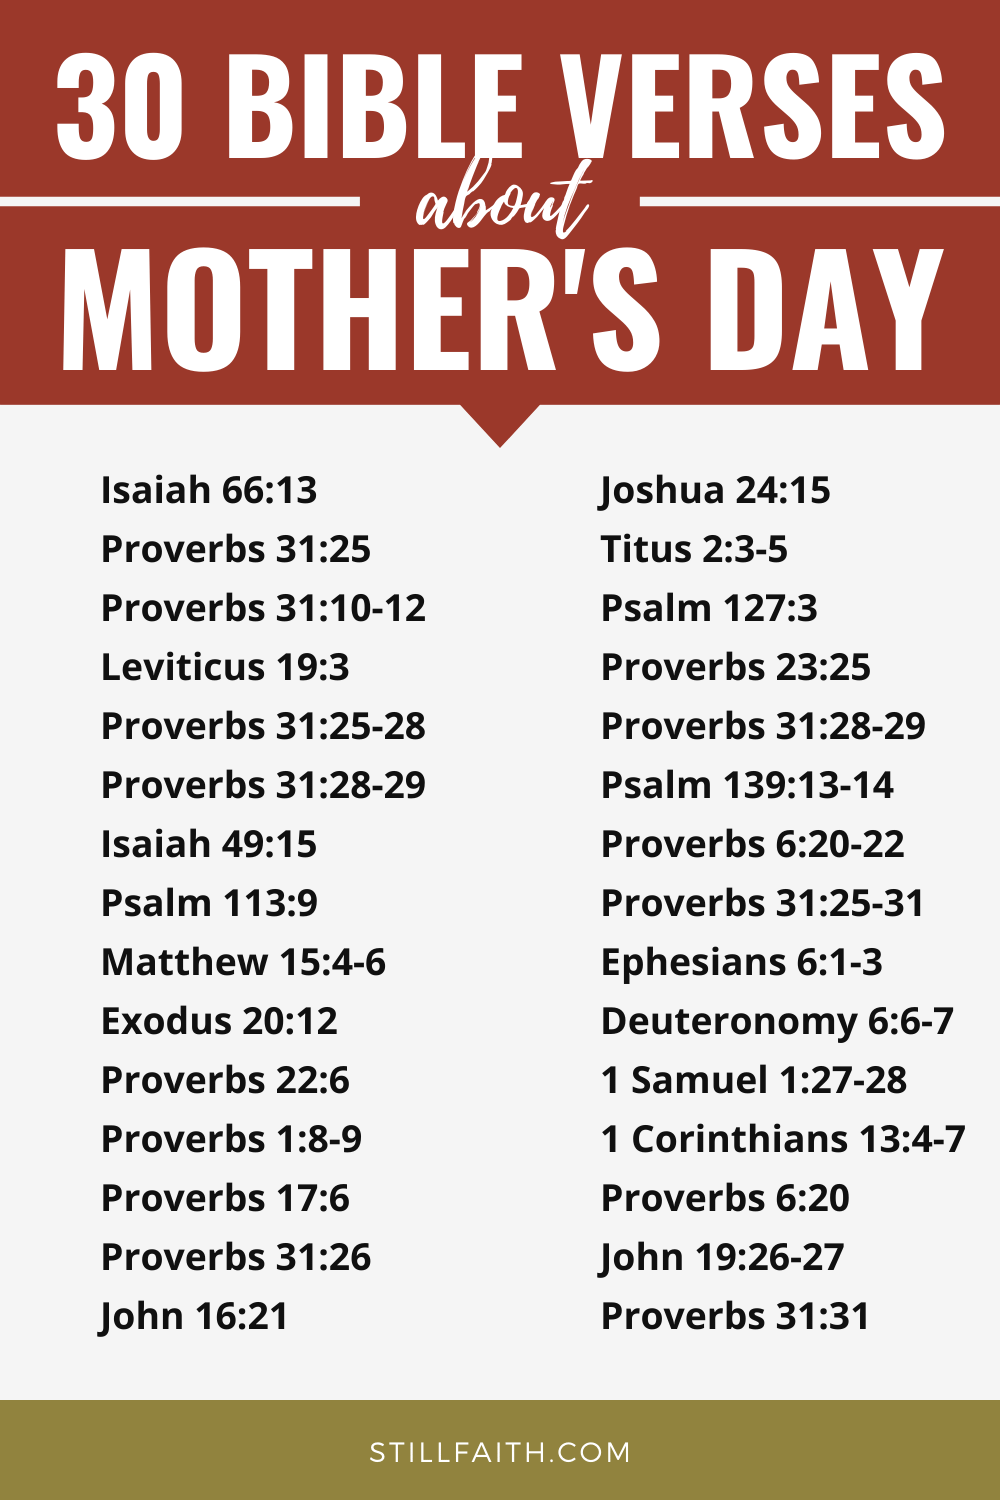 129 Bible Verses about Mother's Day